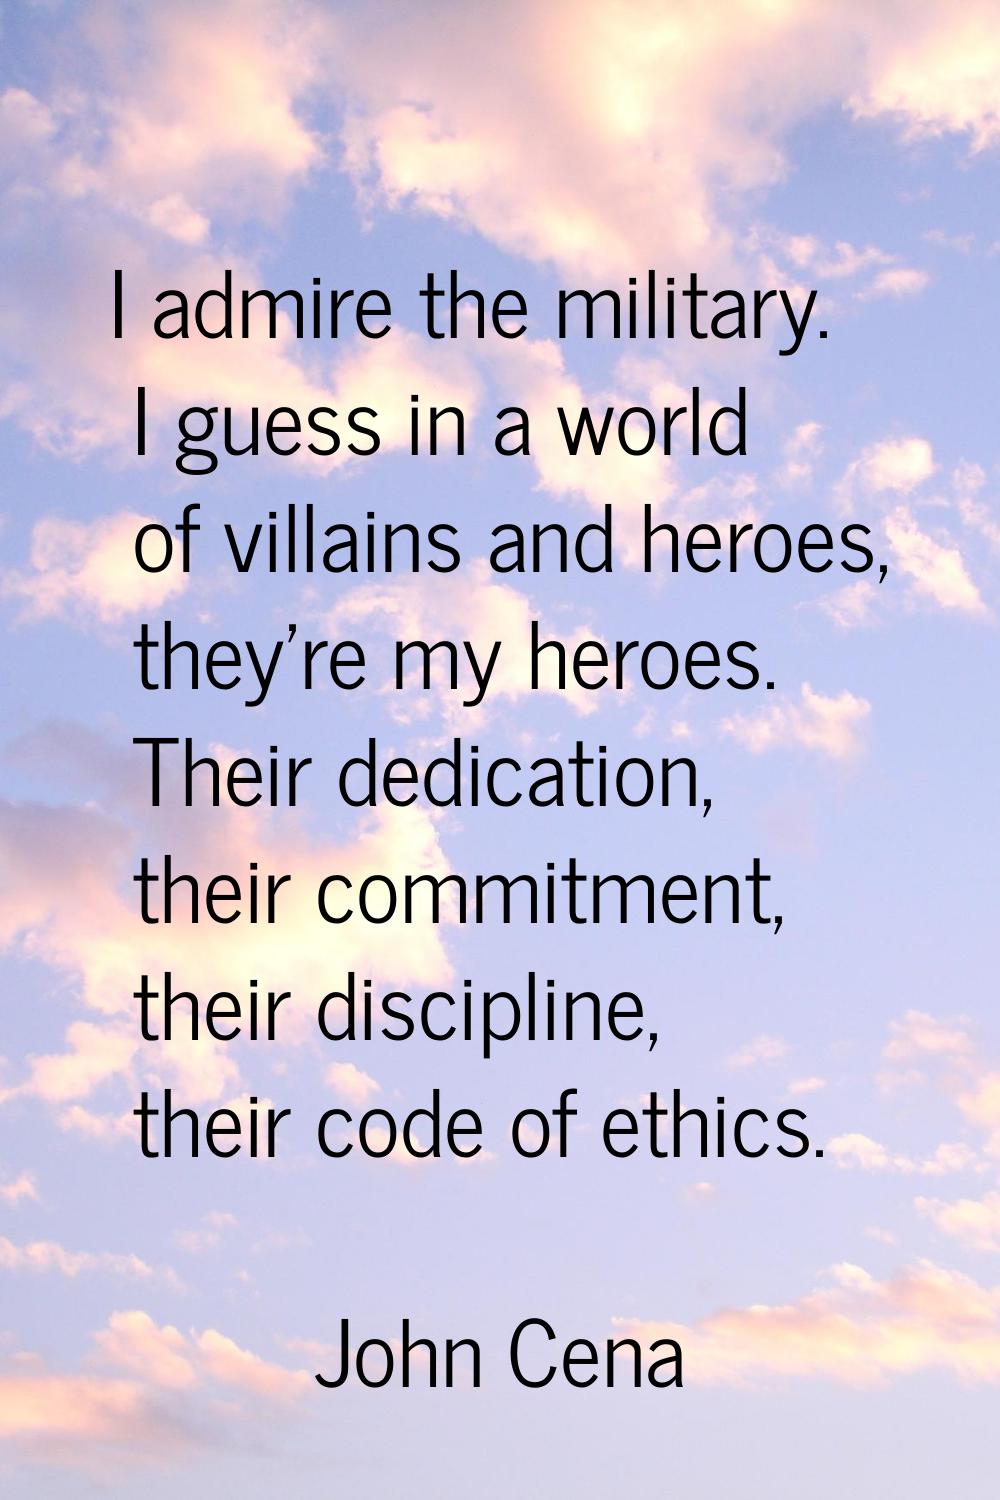 I admire the military. I guess in a world of villains and heroes, they're my heroes. Their dedicati